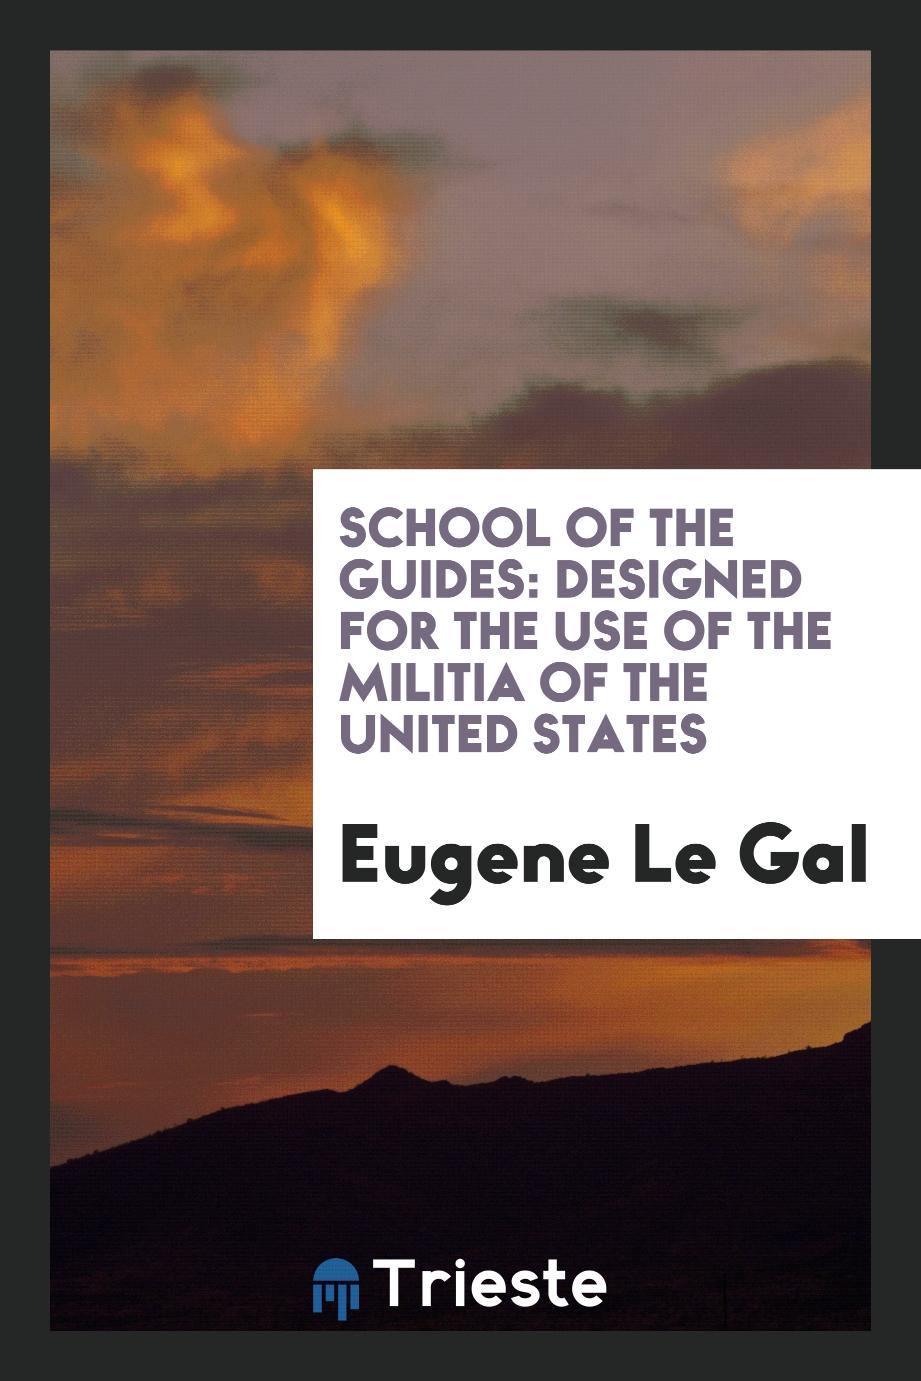 School of the Guides: Designed for the Use of the Militia of the United States